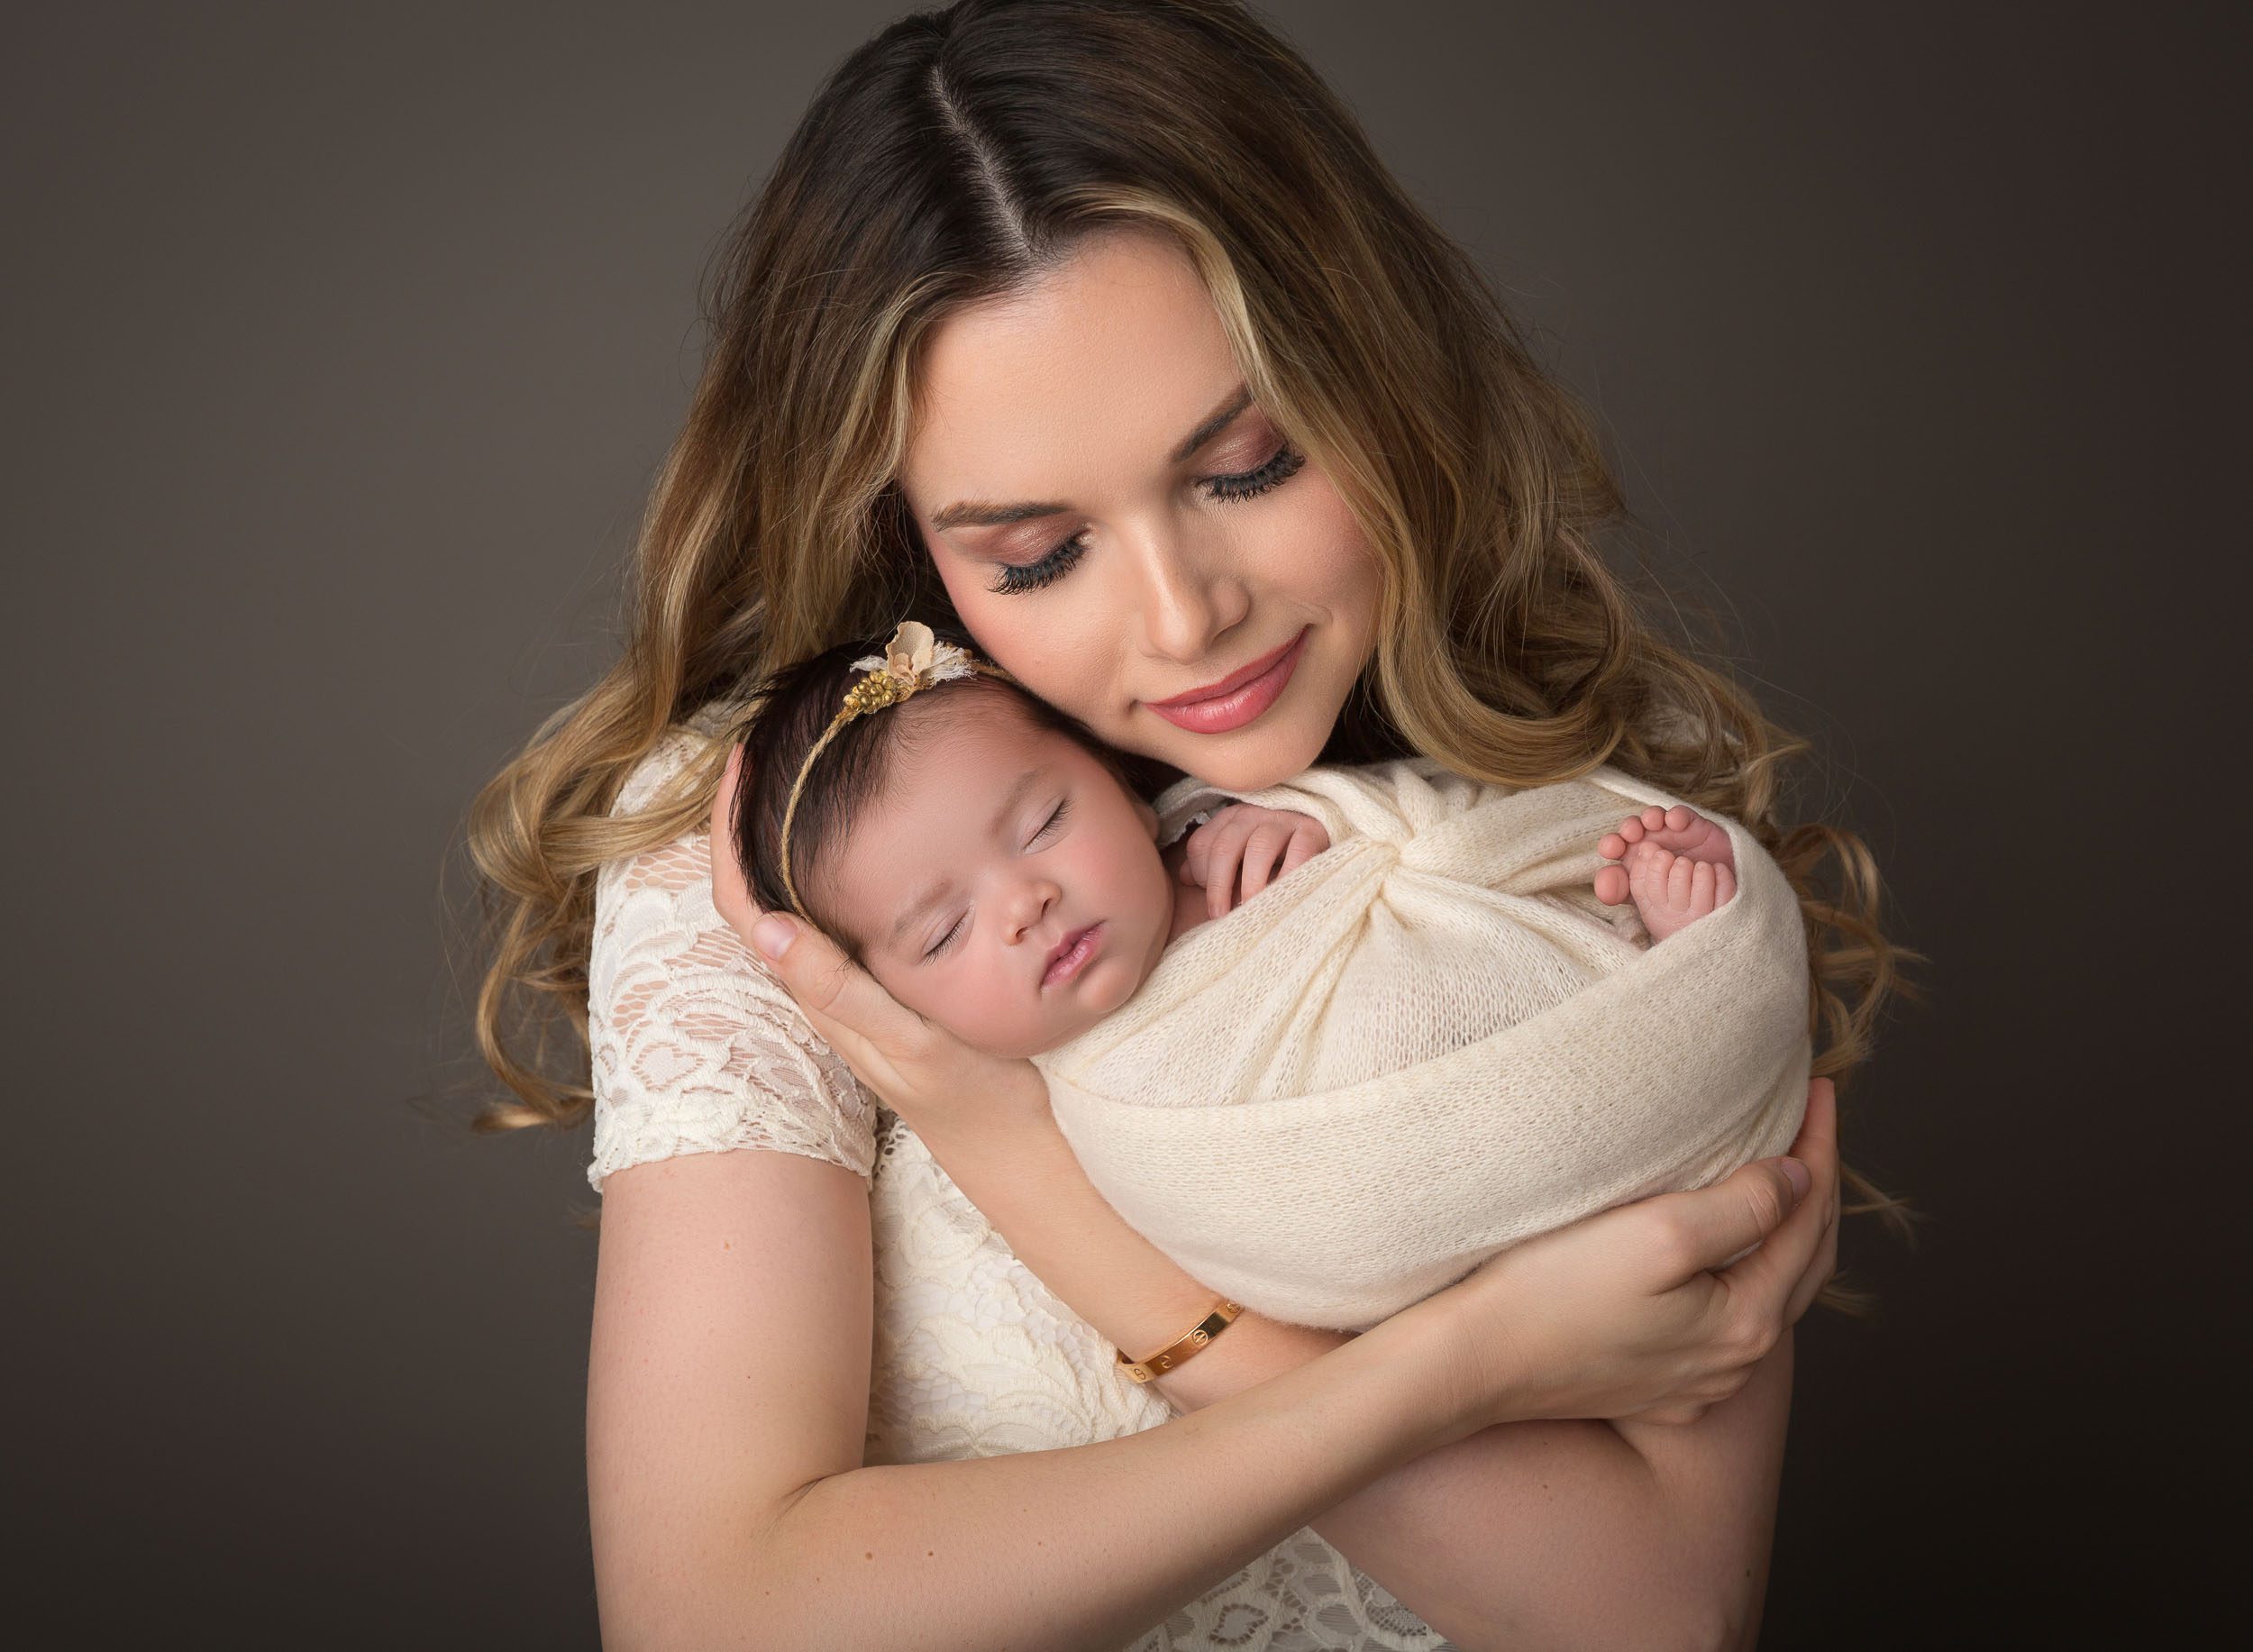 mom holding newborn baby up close to her cheek with eyes closed